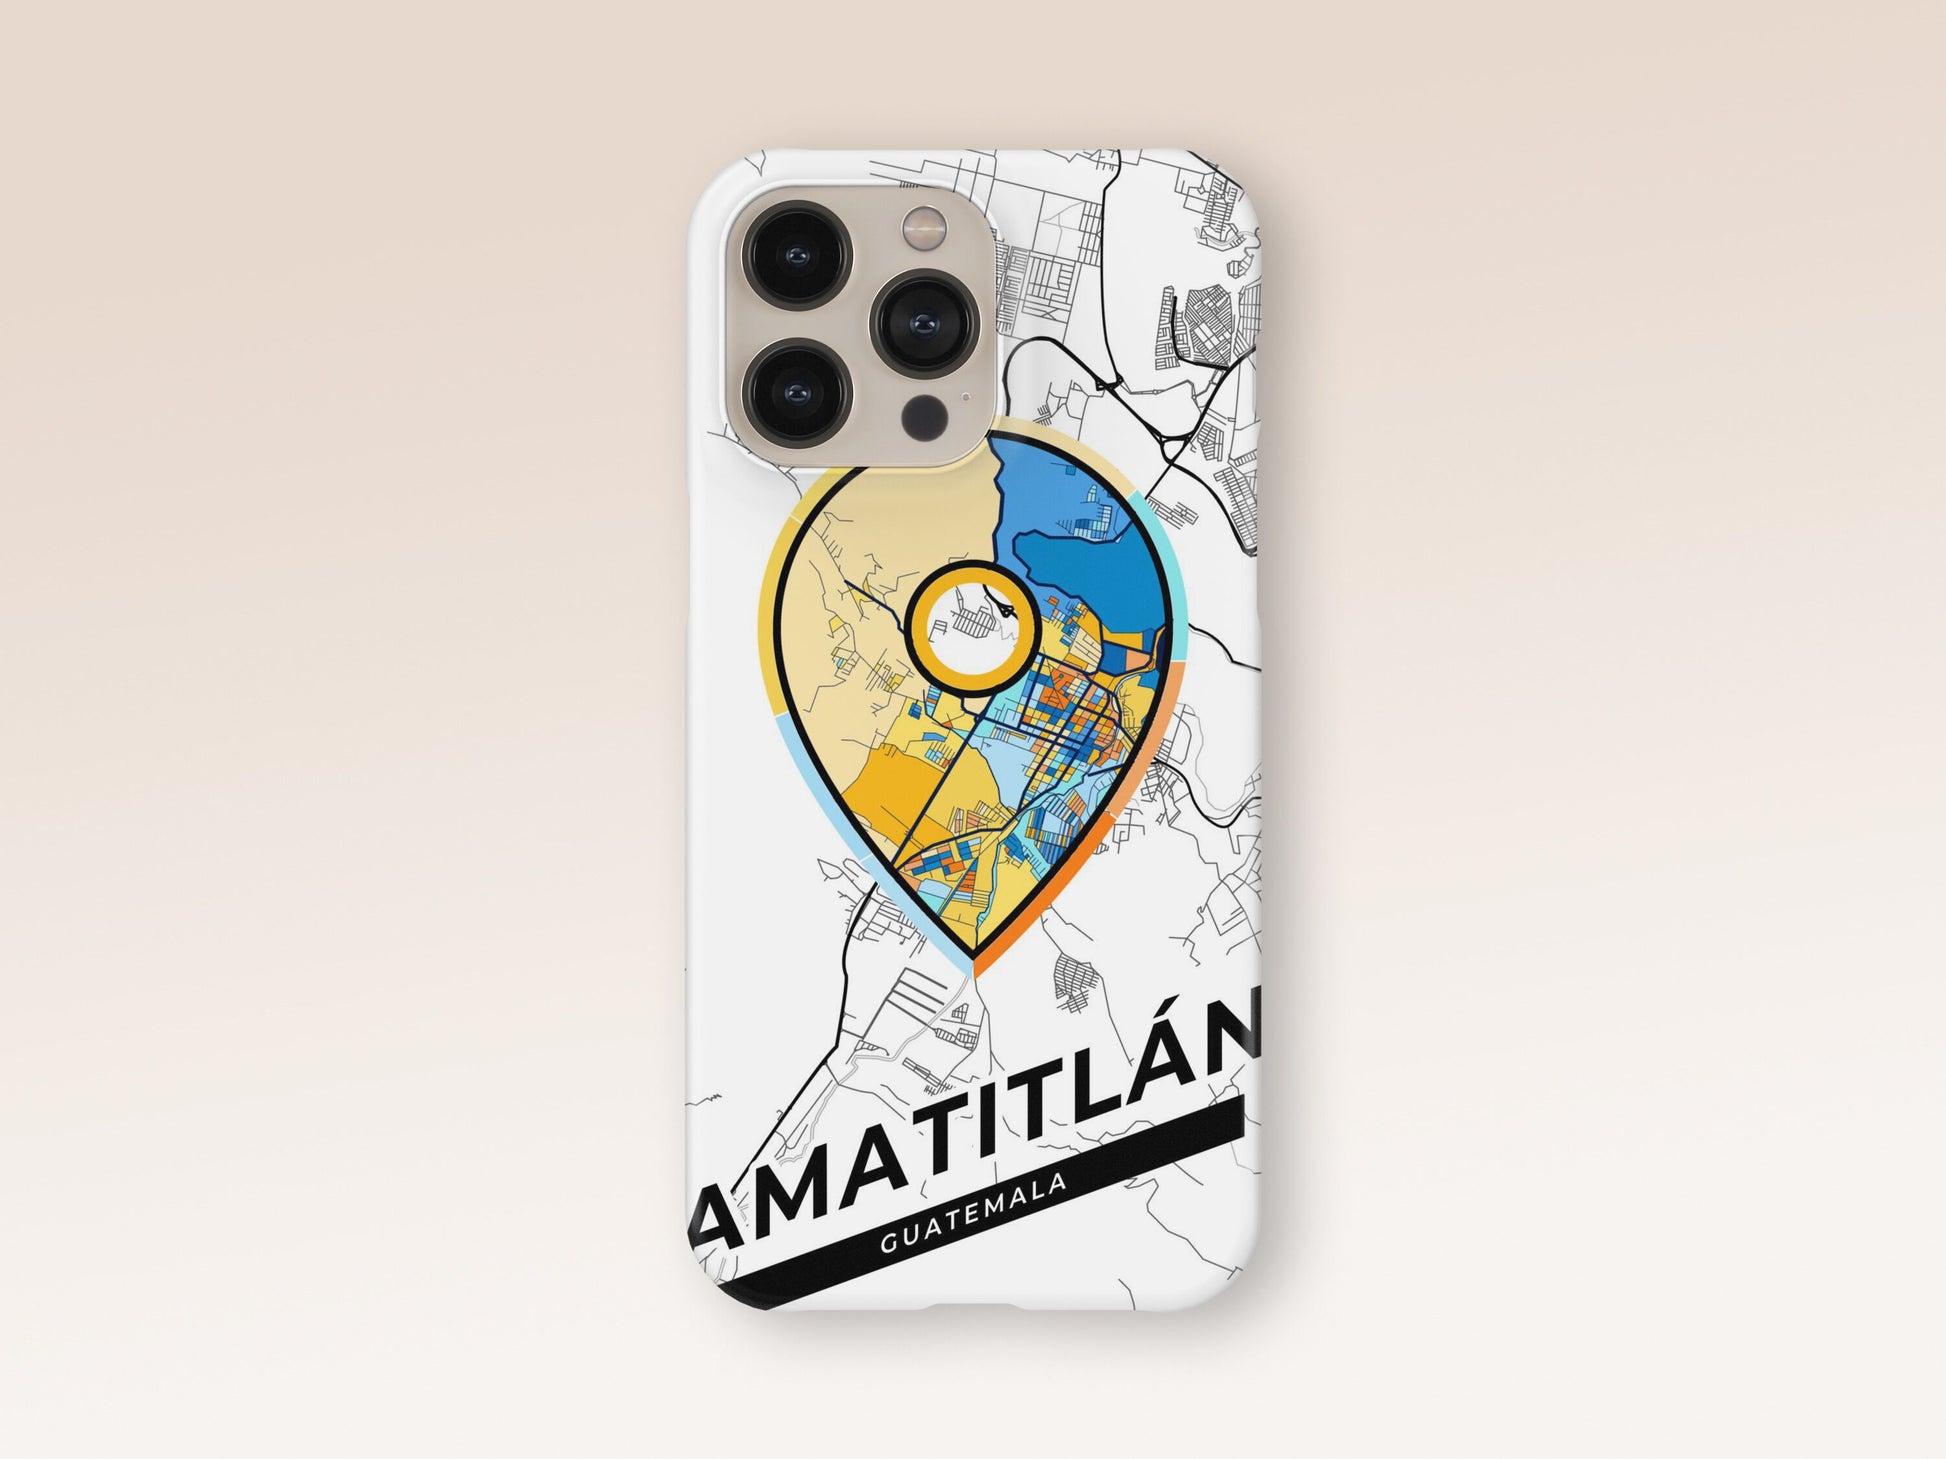 Amatitlán Guatemala slim phone case with colorful icon. Birthday, wedding or housewarming gift. Couple match cases. 1